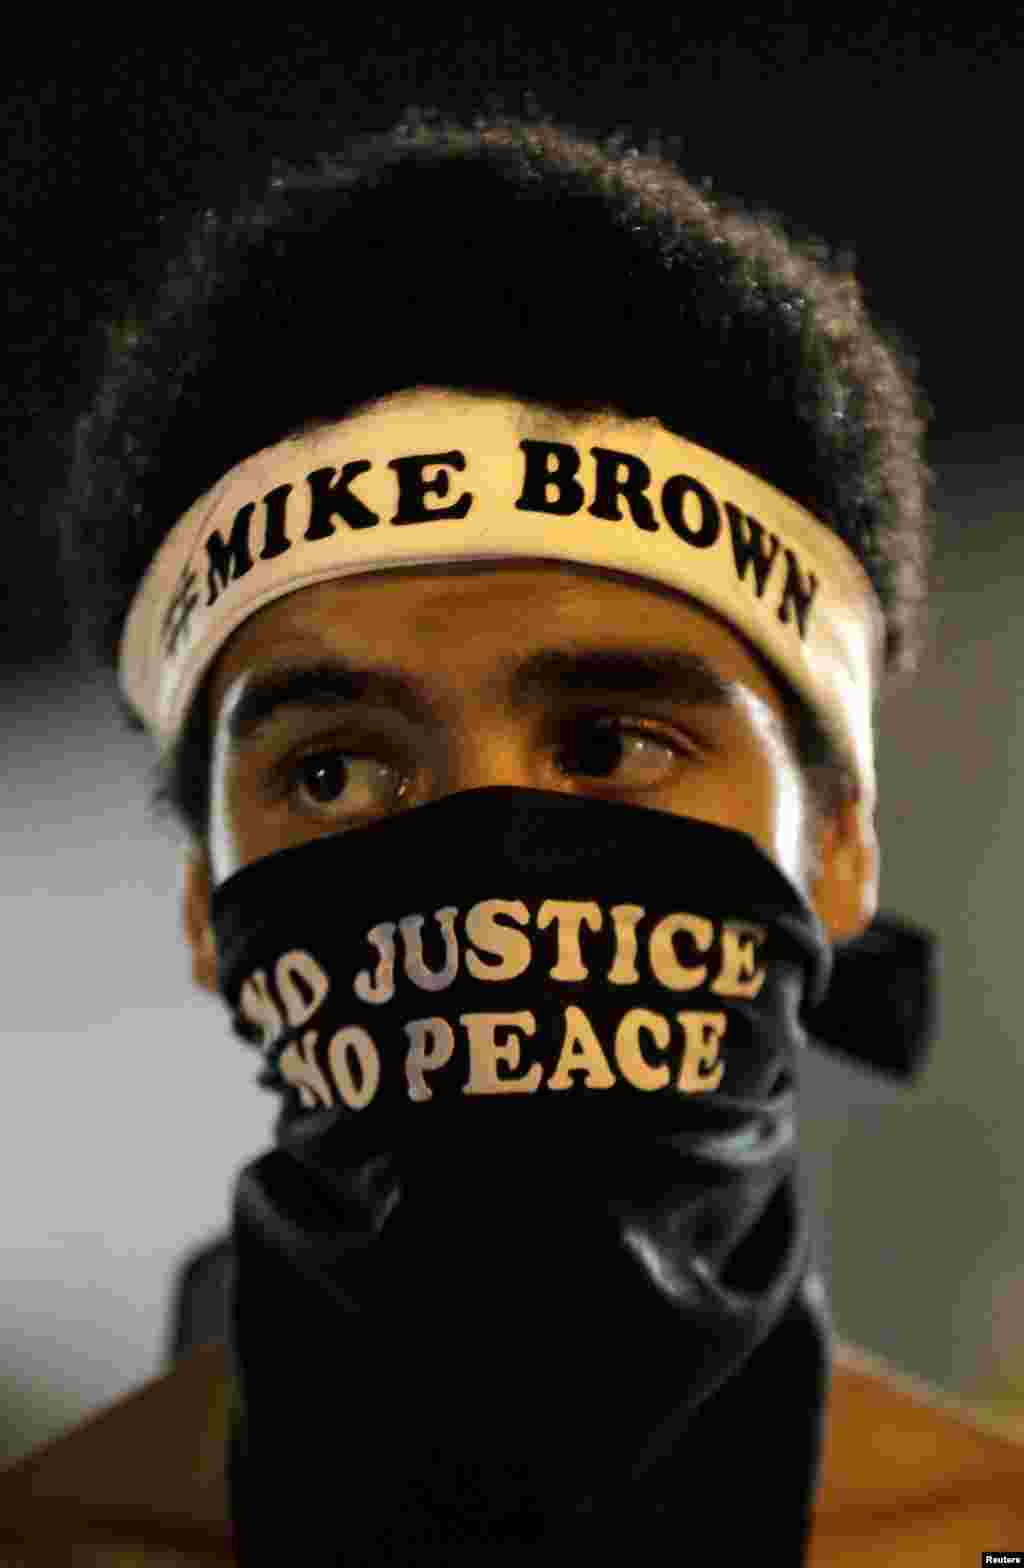 Quentin Baker, from Crystal City, Missouri participates in a protest in Ferguson, Missouri, Aug. 20, 2014.